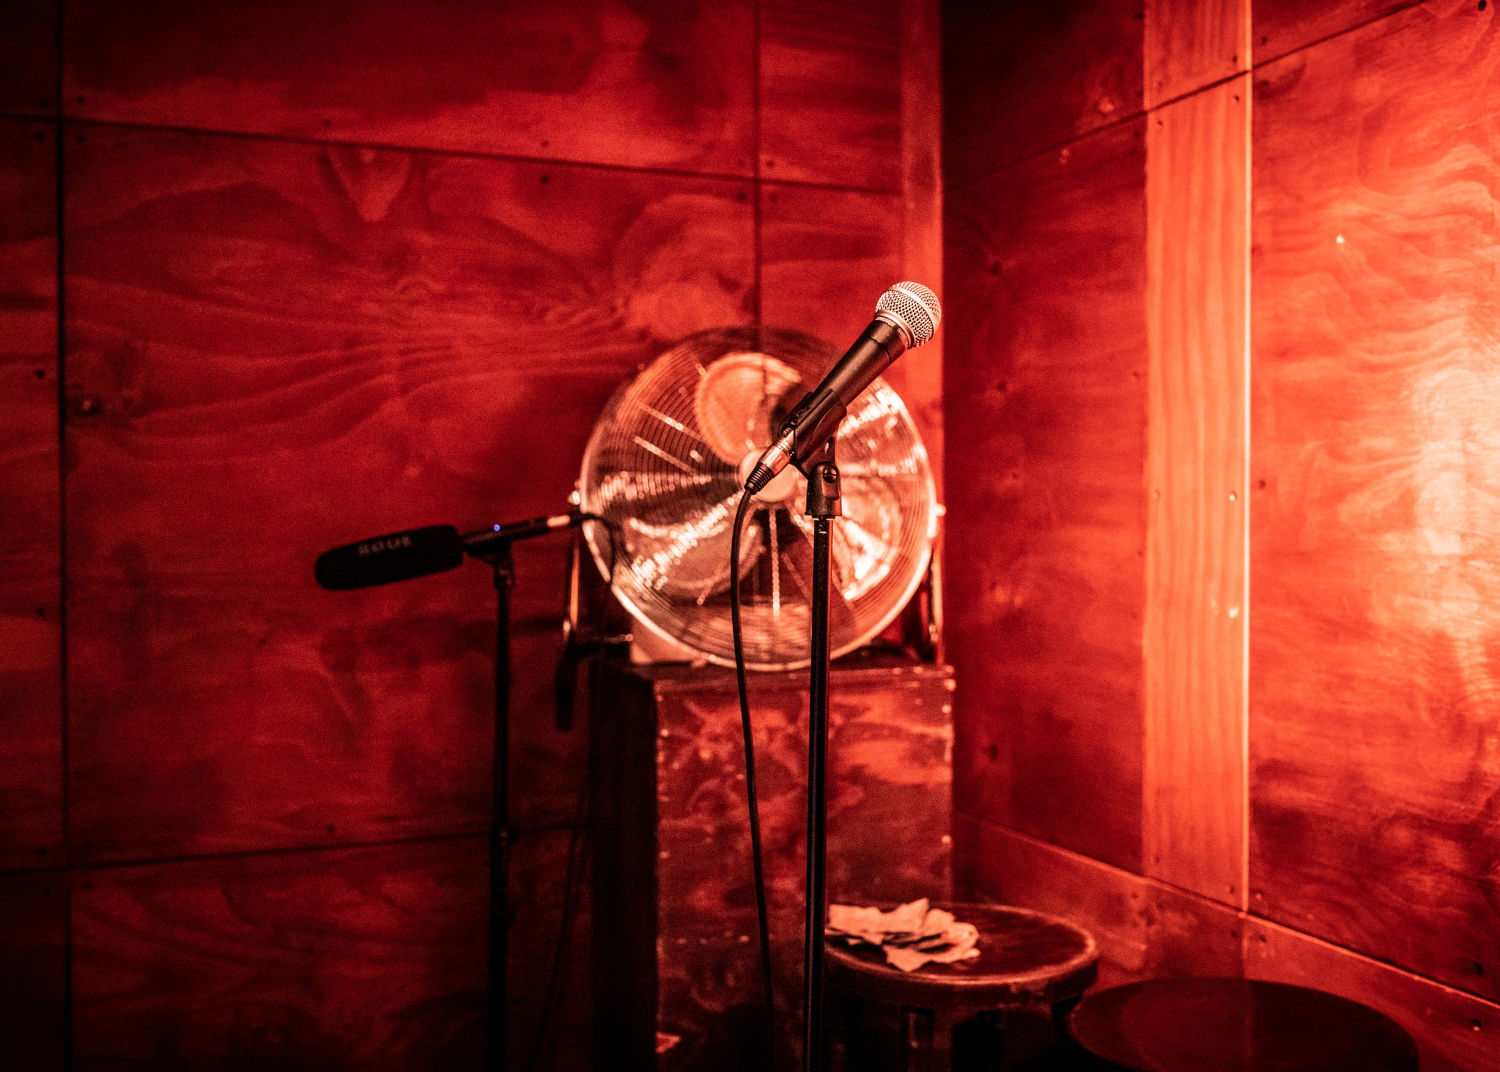 Stand-up stage before the show 'Stereo Comedy' in Berlin